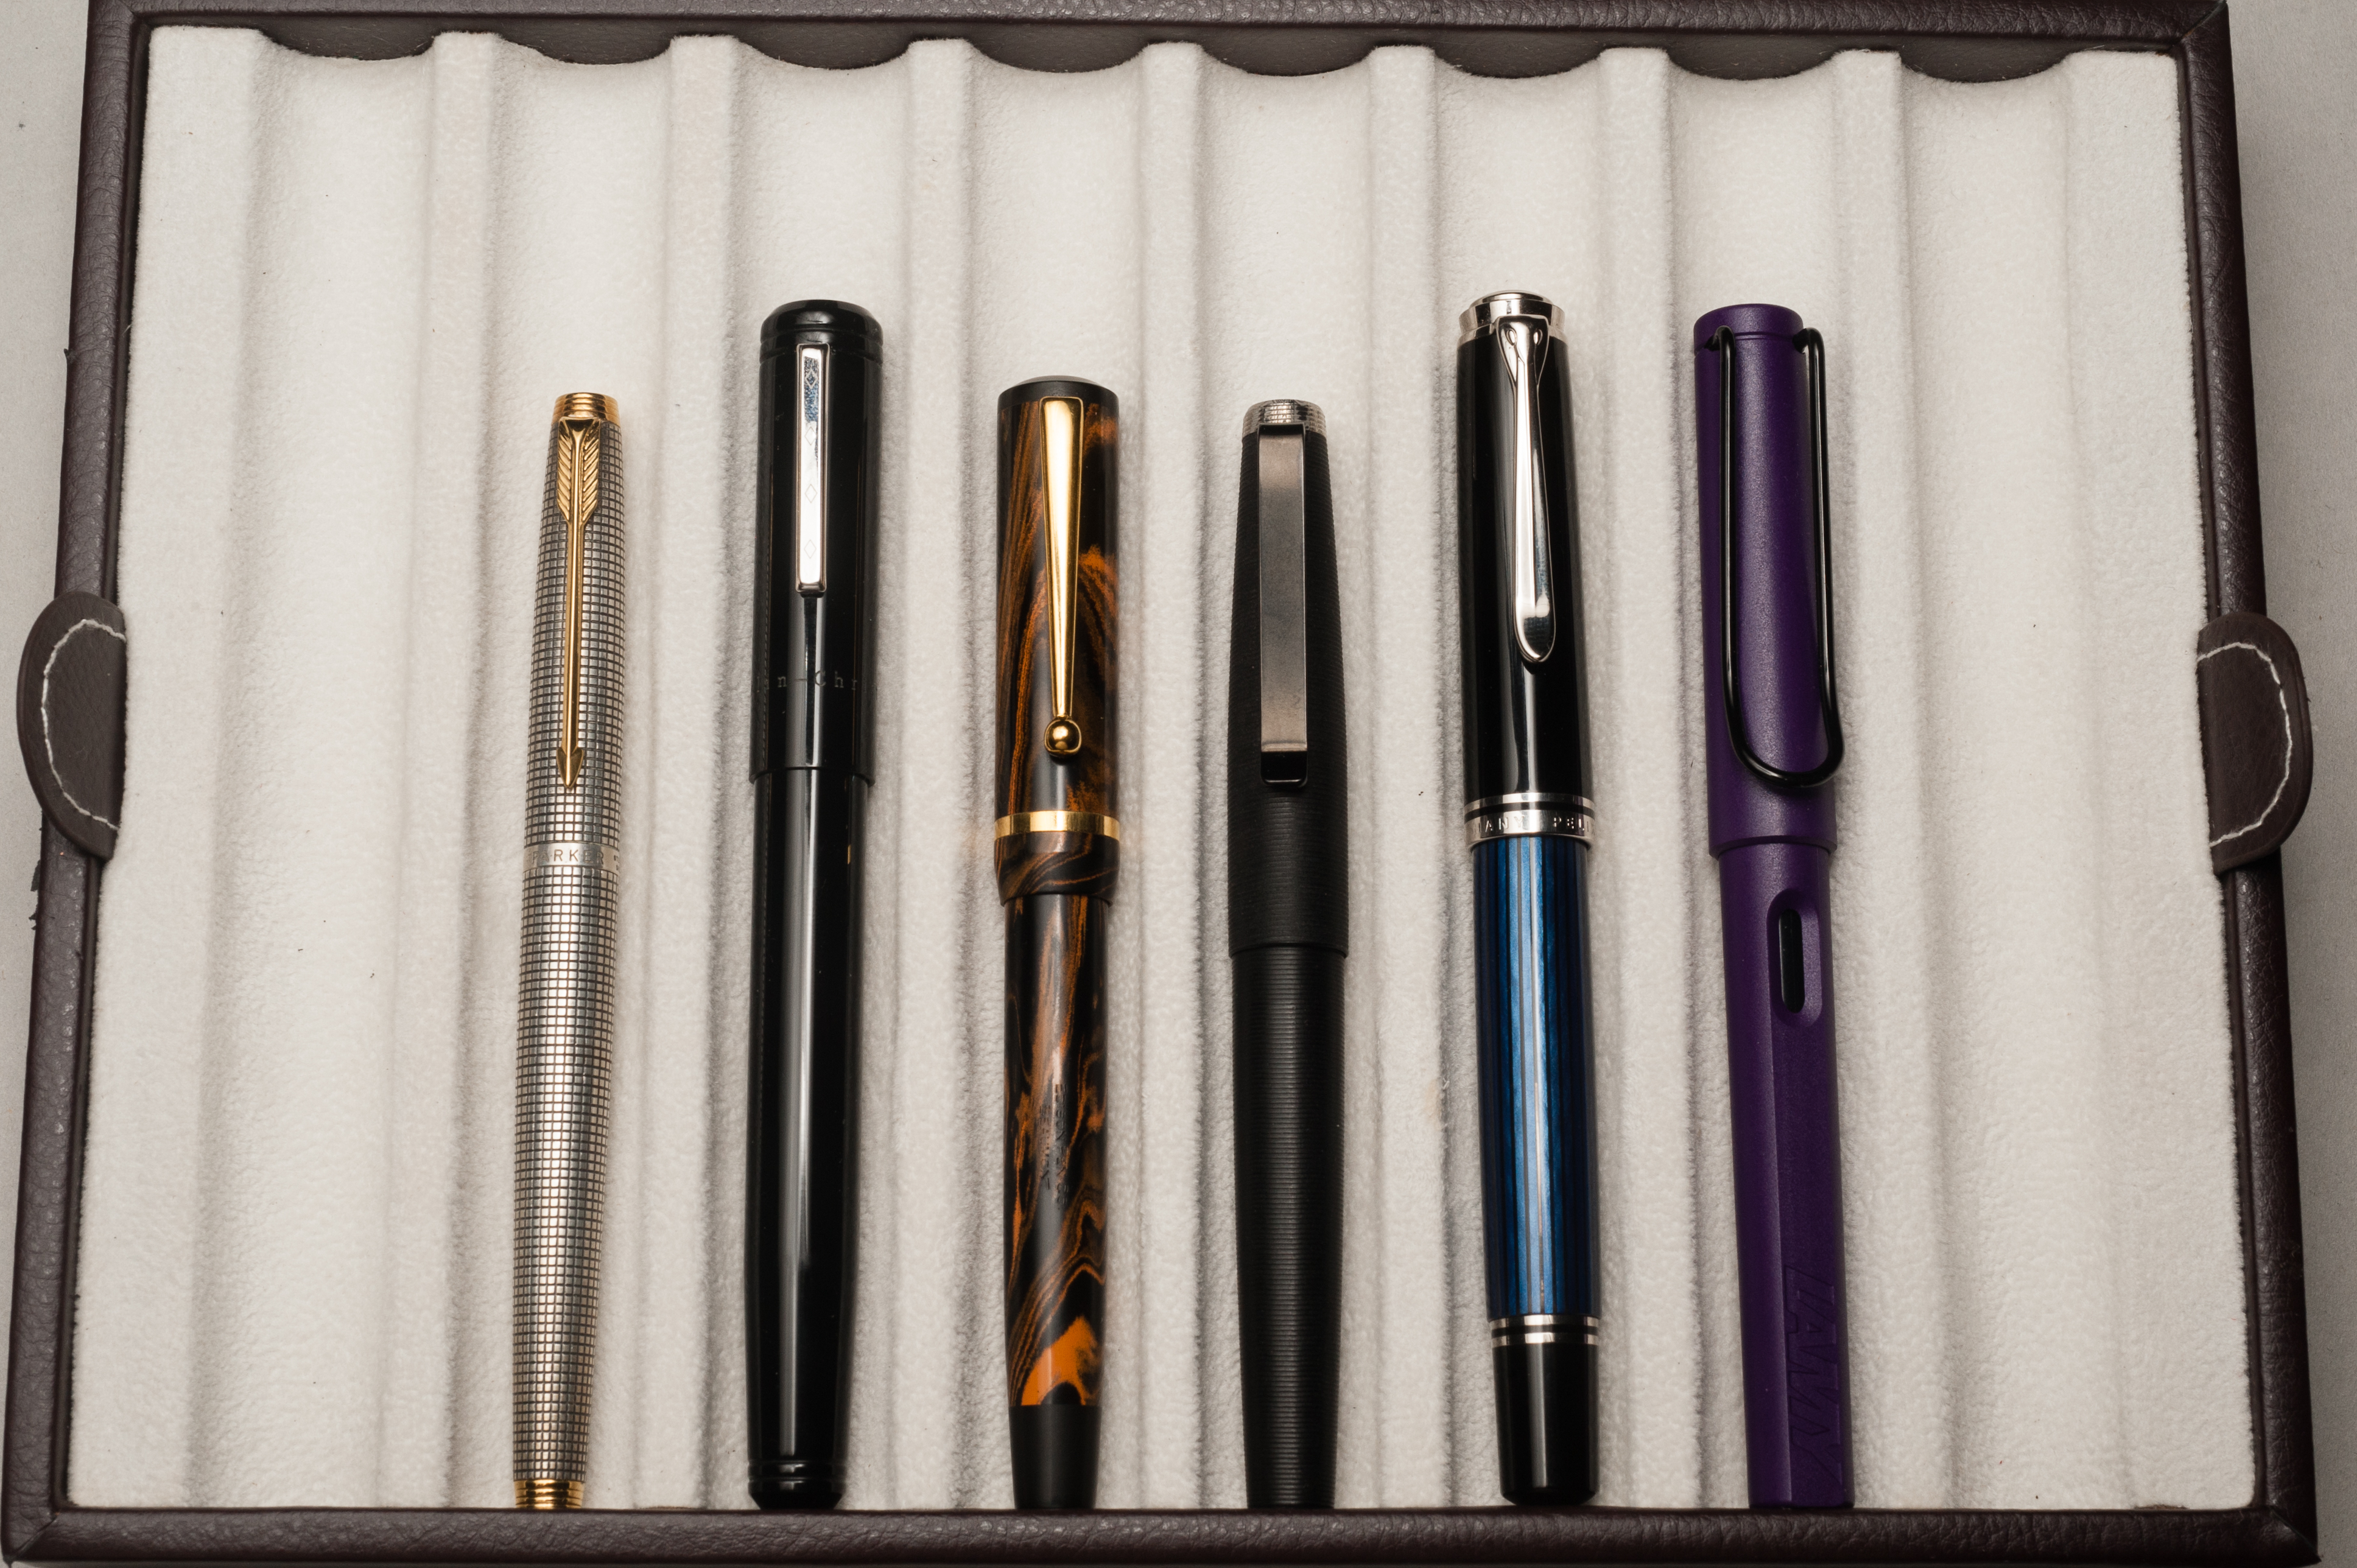 Closed pens from left to right: Parker 75, Franklin-Christoph Model 20, Edison Beaumont, Tactile Turn Gist, Pelikan M805, and Lamy Safari